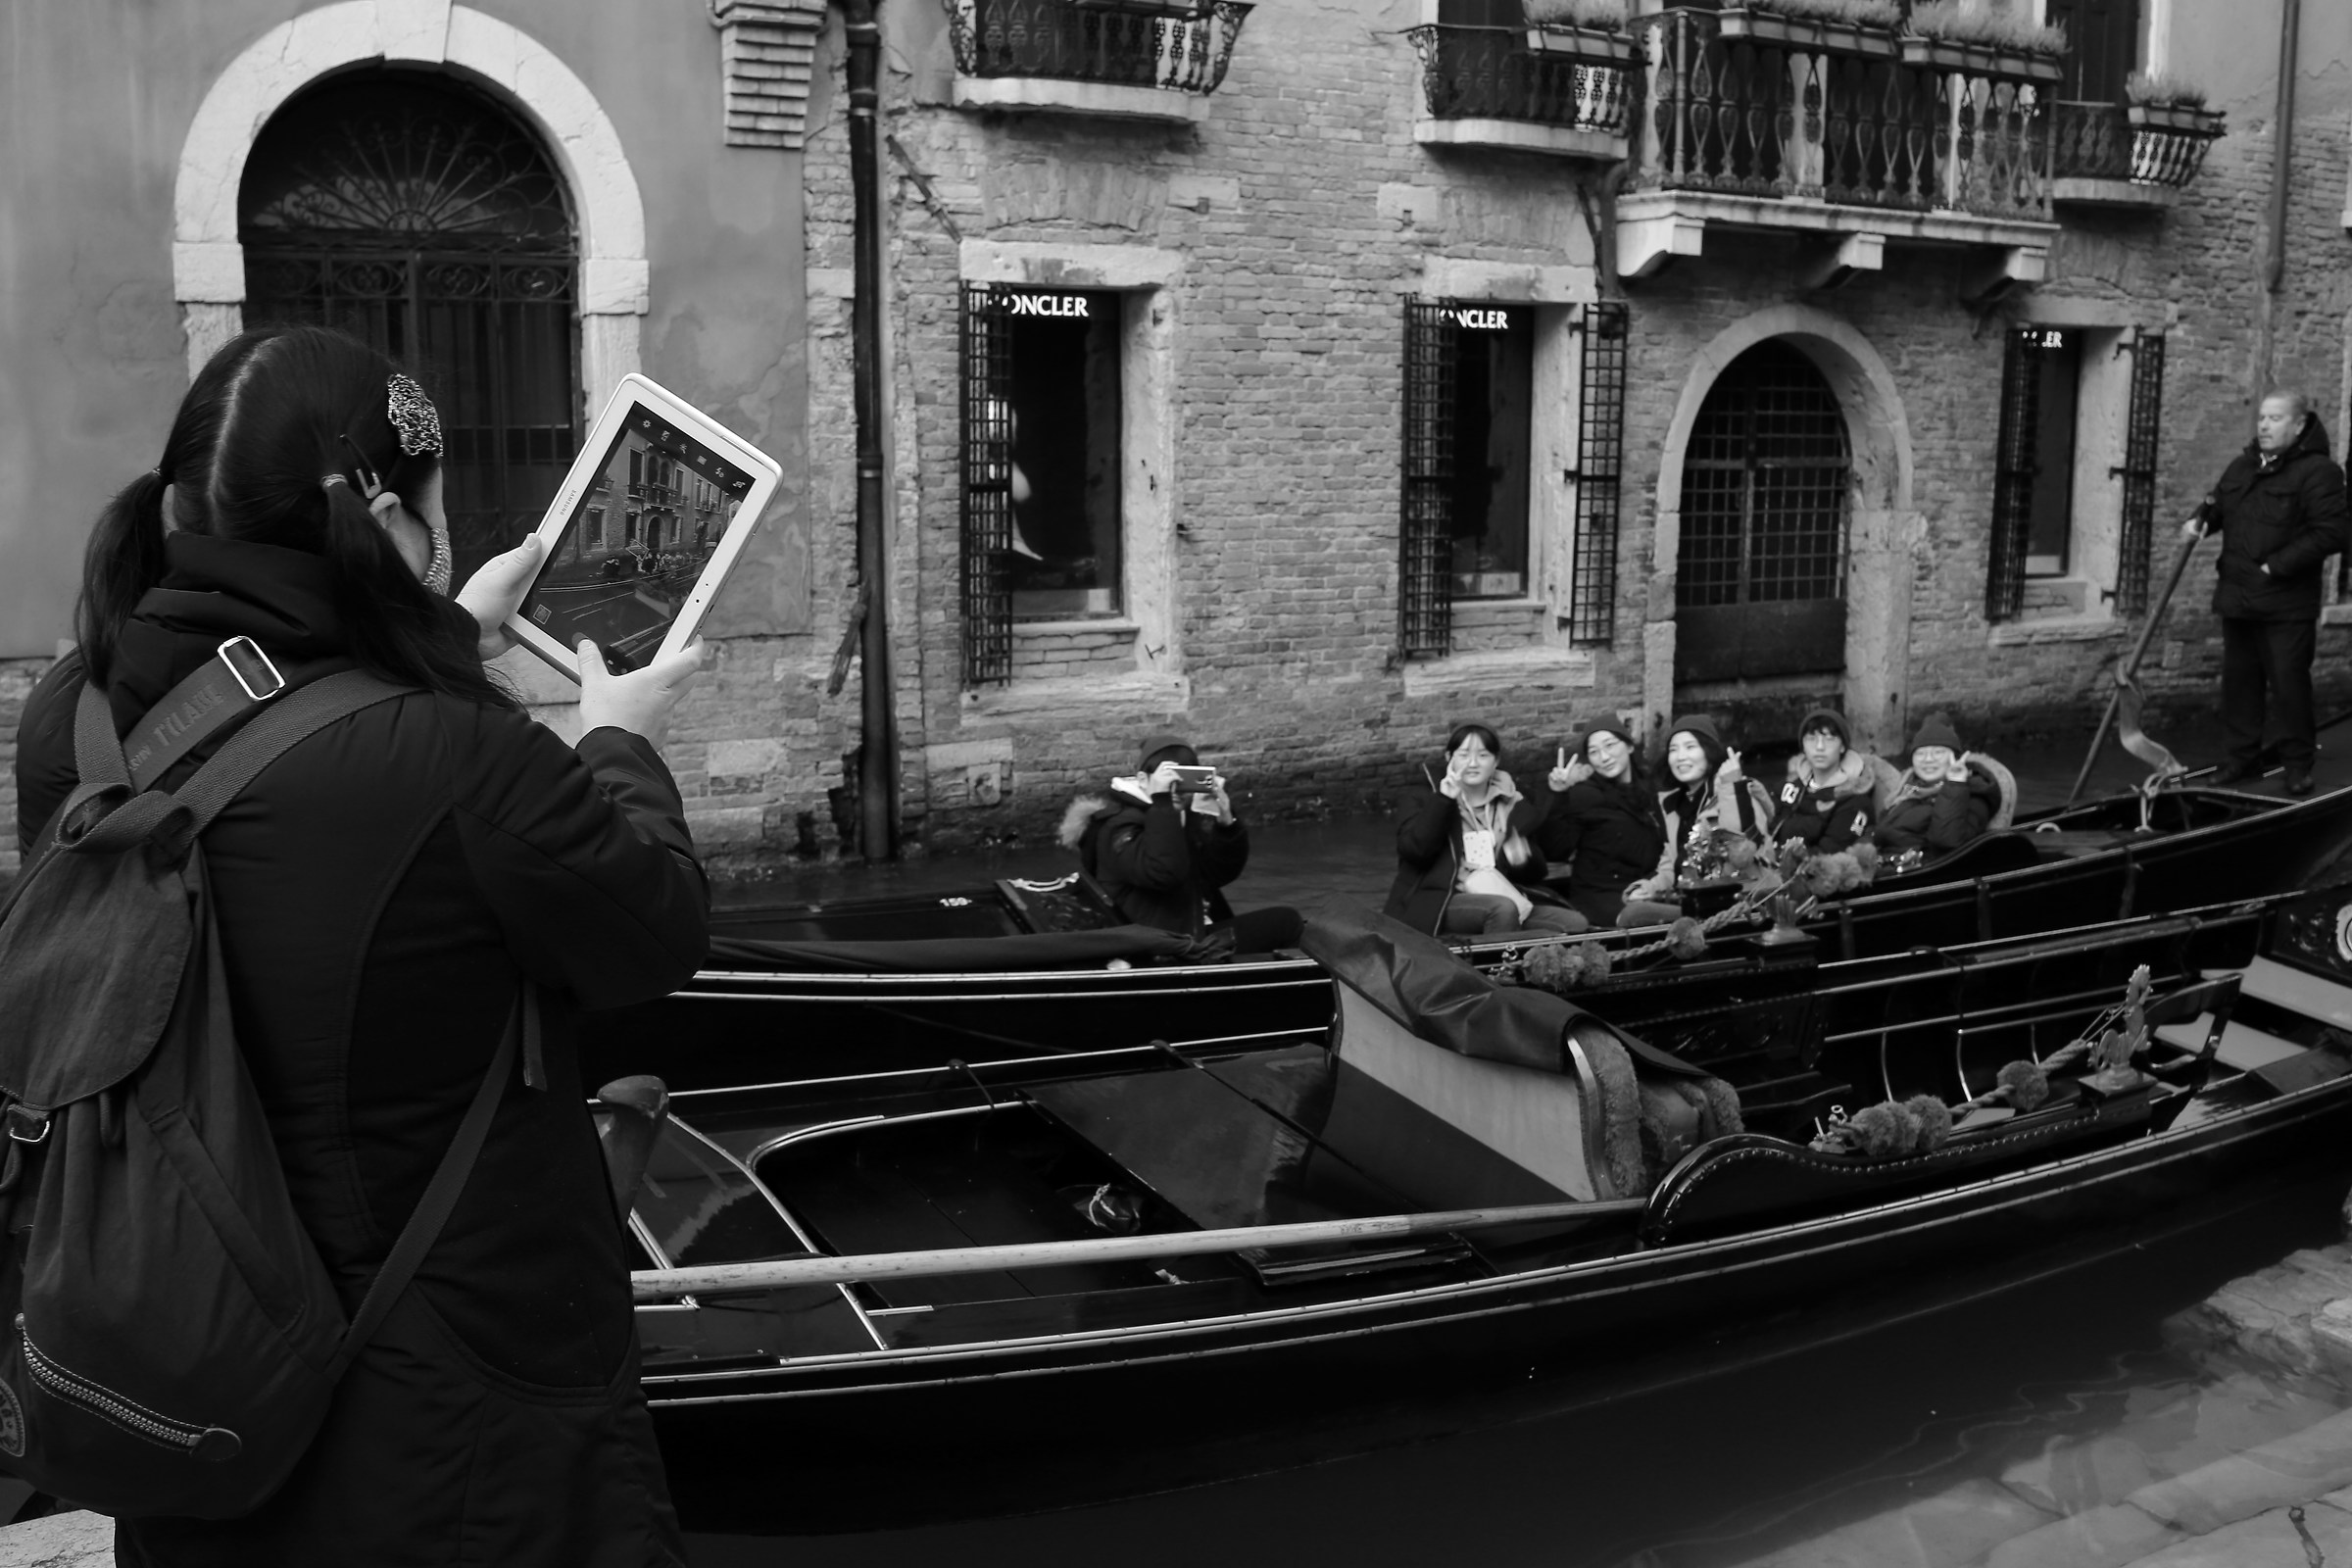 Photography in Venice...